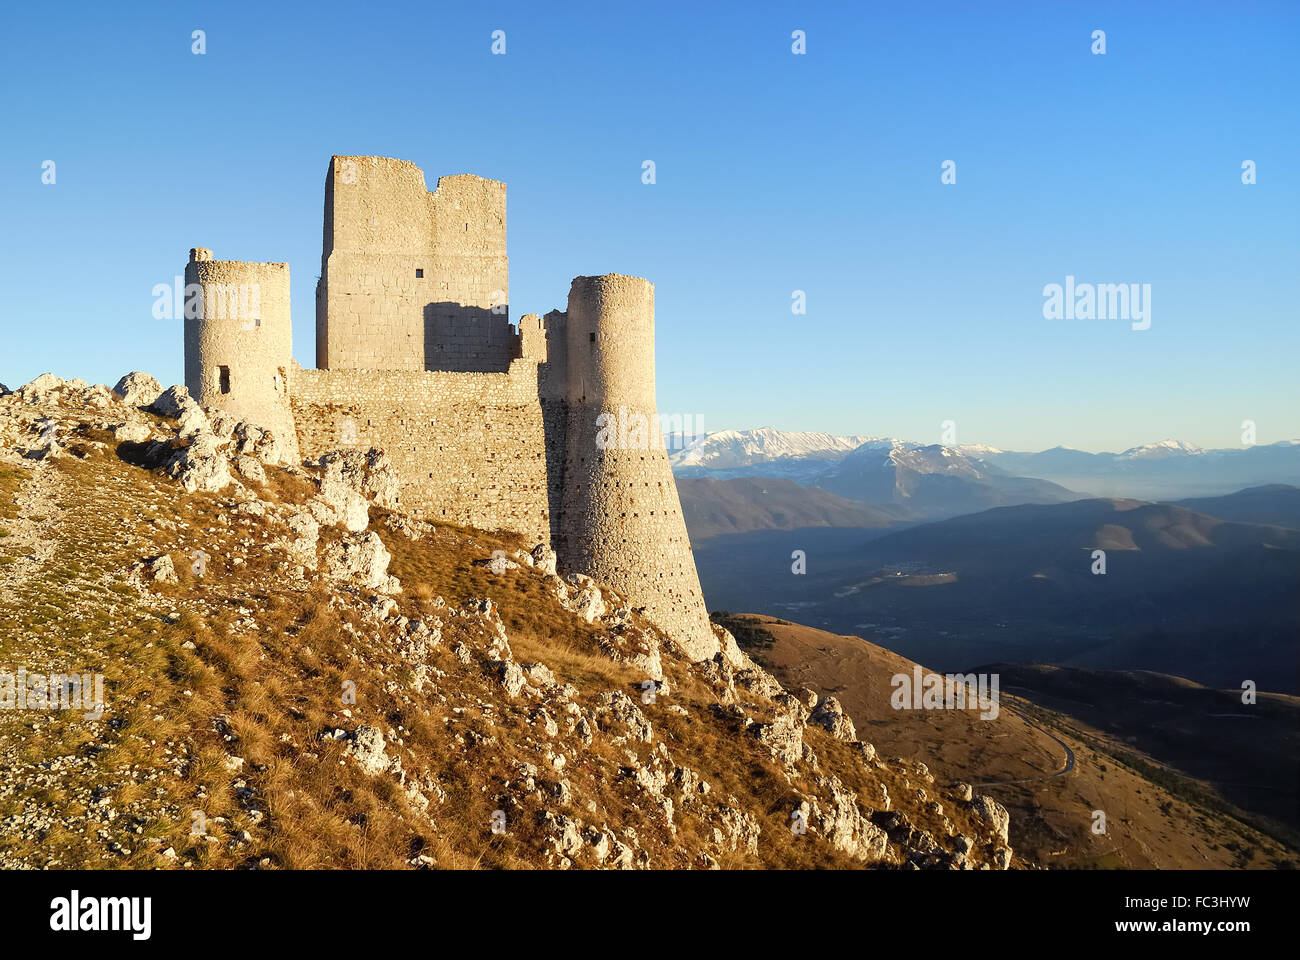 Rocca Calascio is a mountaintop fortress or rocca in the Province of  L'Aquila in Abruzzo, Italy. At an elevation of 1,460 metres (4,790 ft), Rocca  Calascio is the highest fortress in the